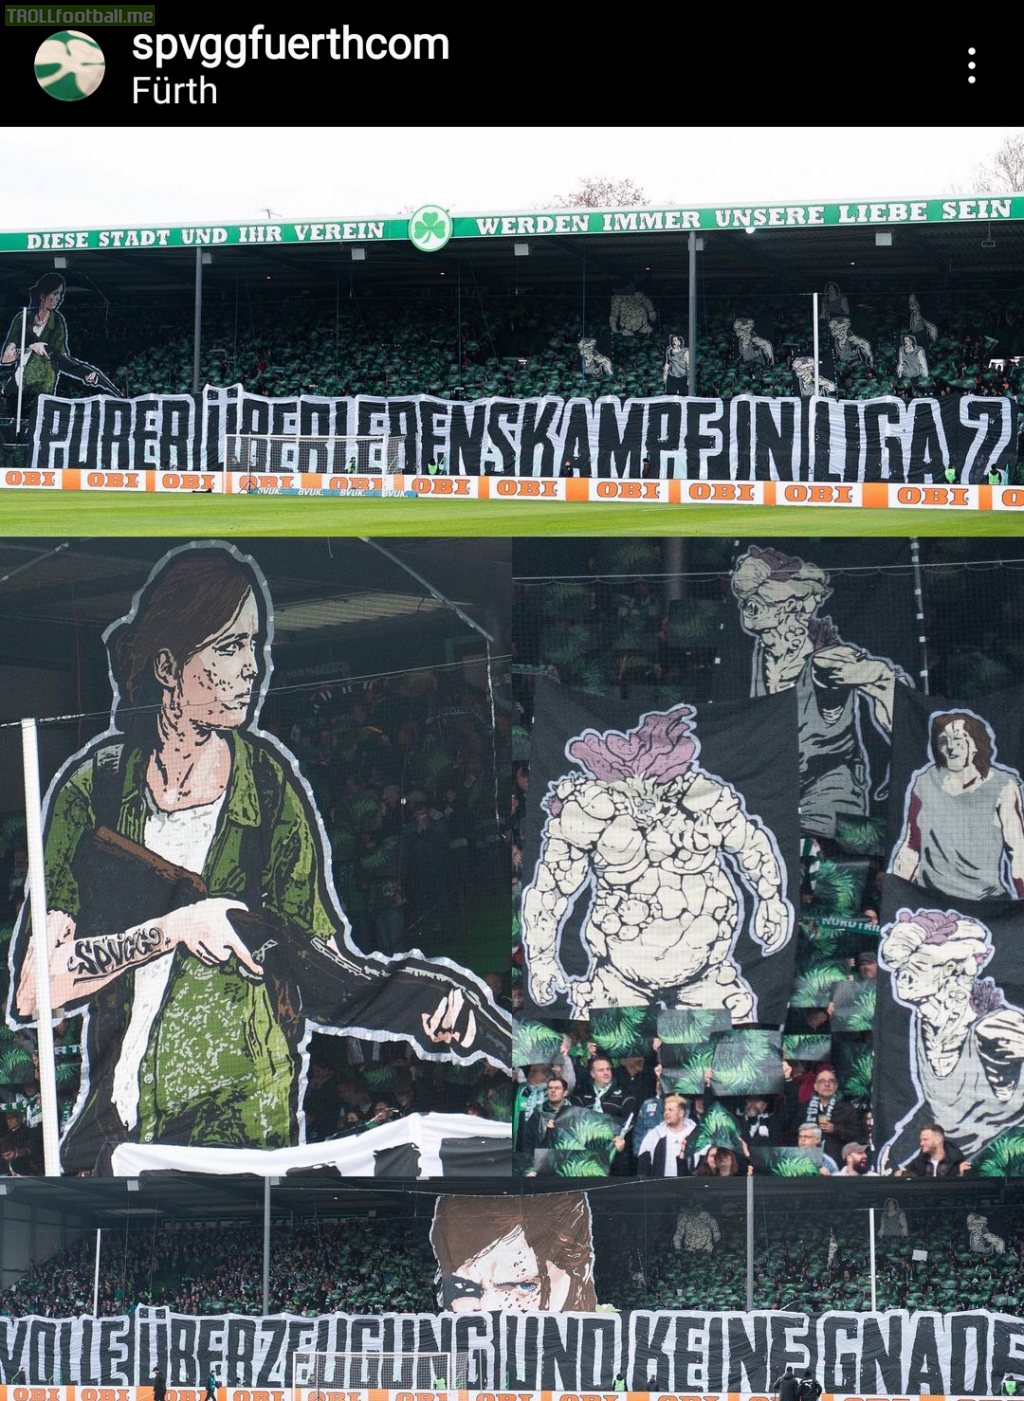 Greuther Fürth amazing TLOU inspired choreography during their match with Jahn Regensburg.